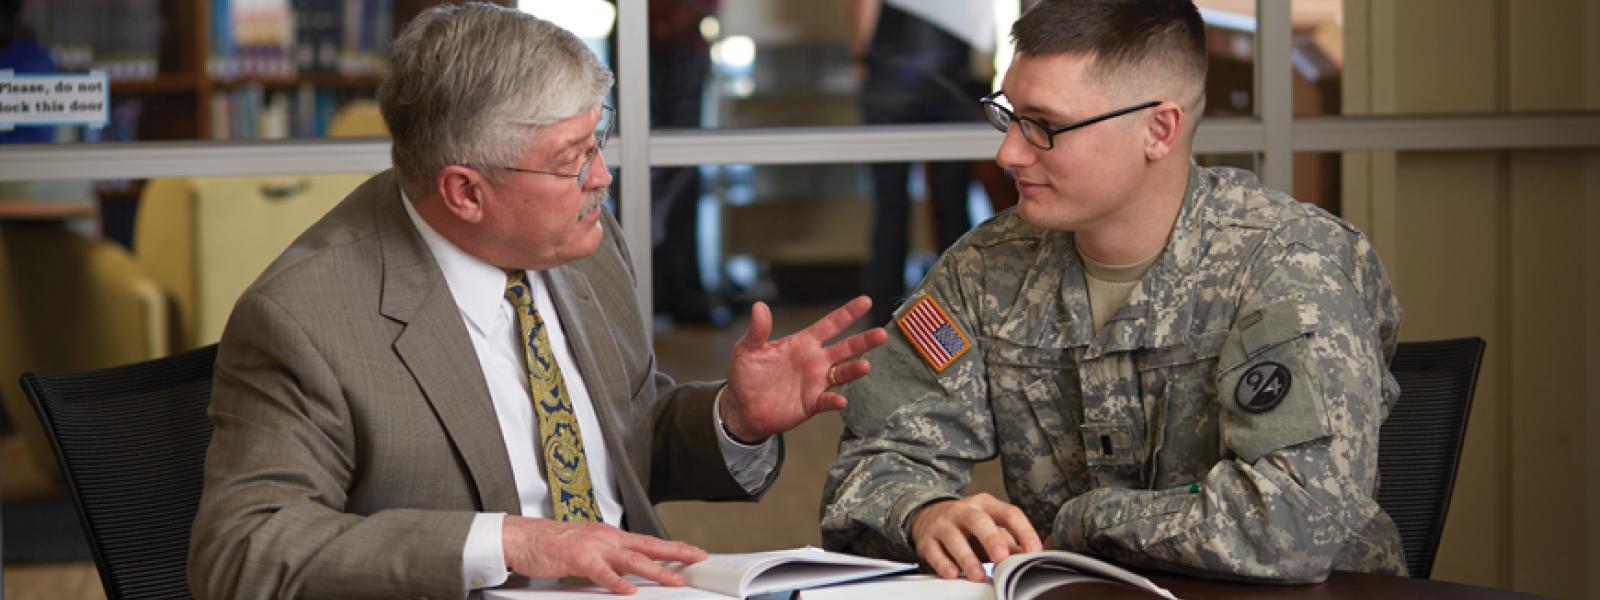 A seminary professor speaking with a military chaplaincy student in an office environment.